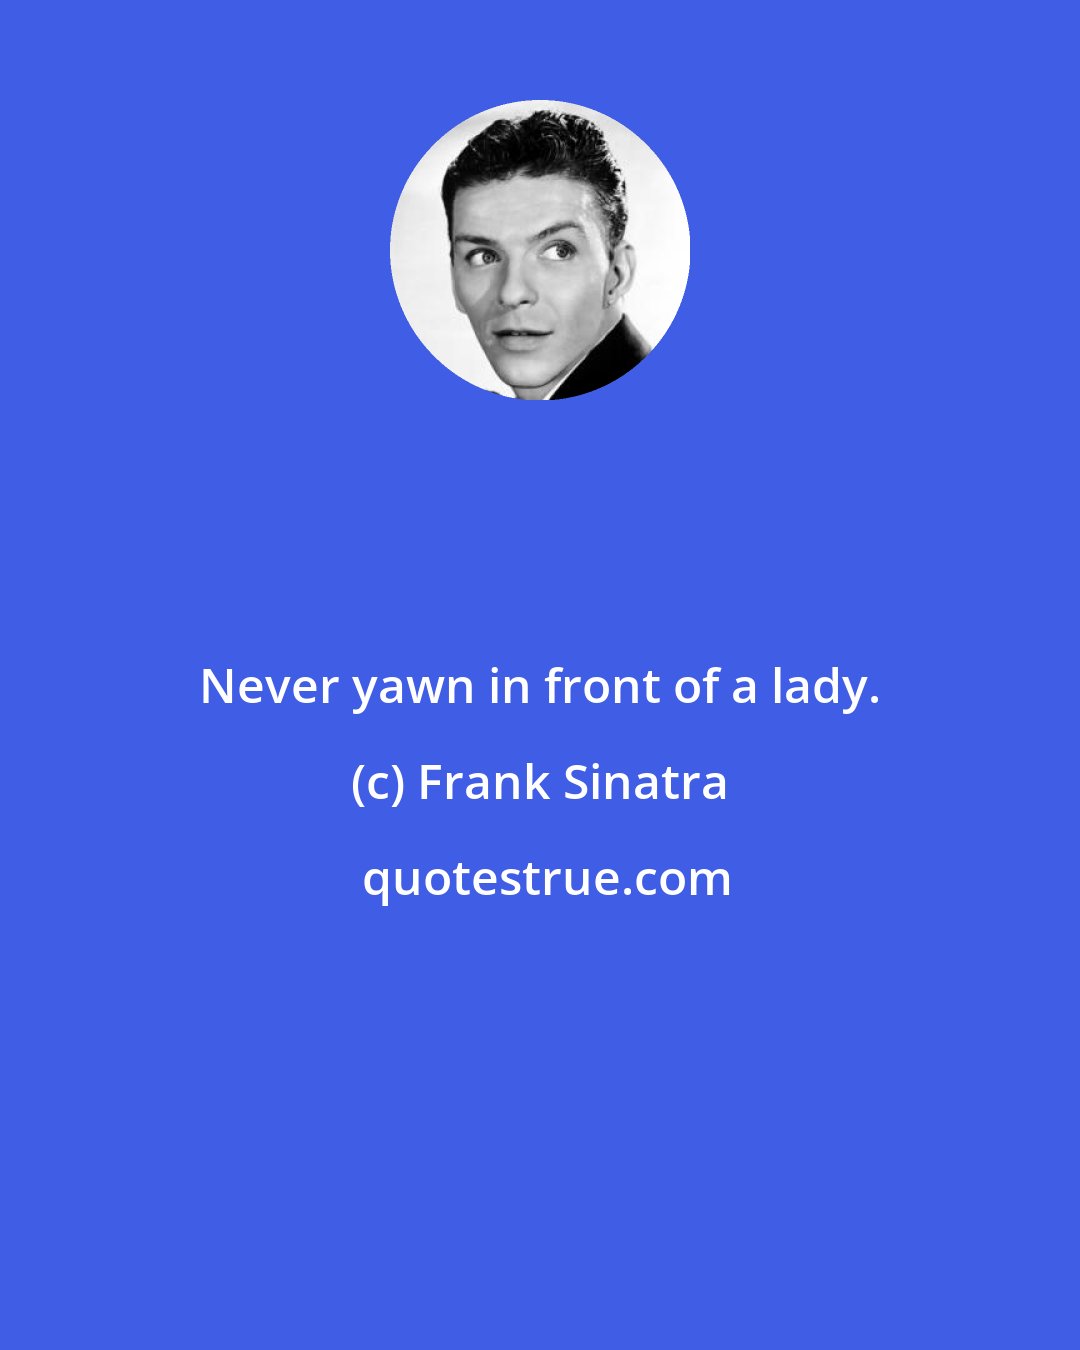 Frank Sinatra: Never yawn in front of a lady.